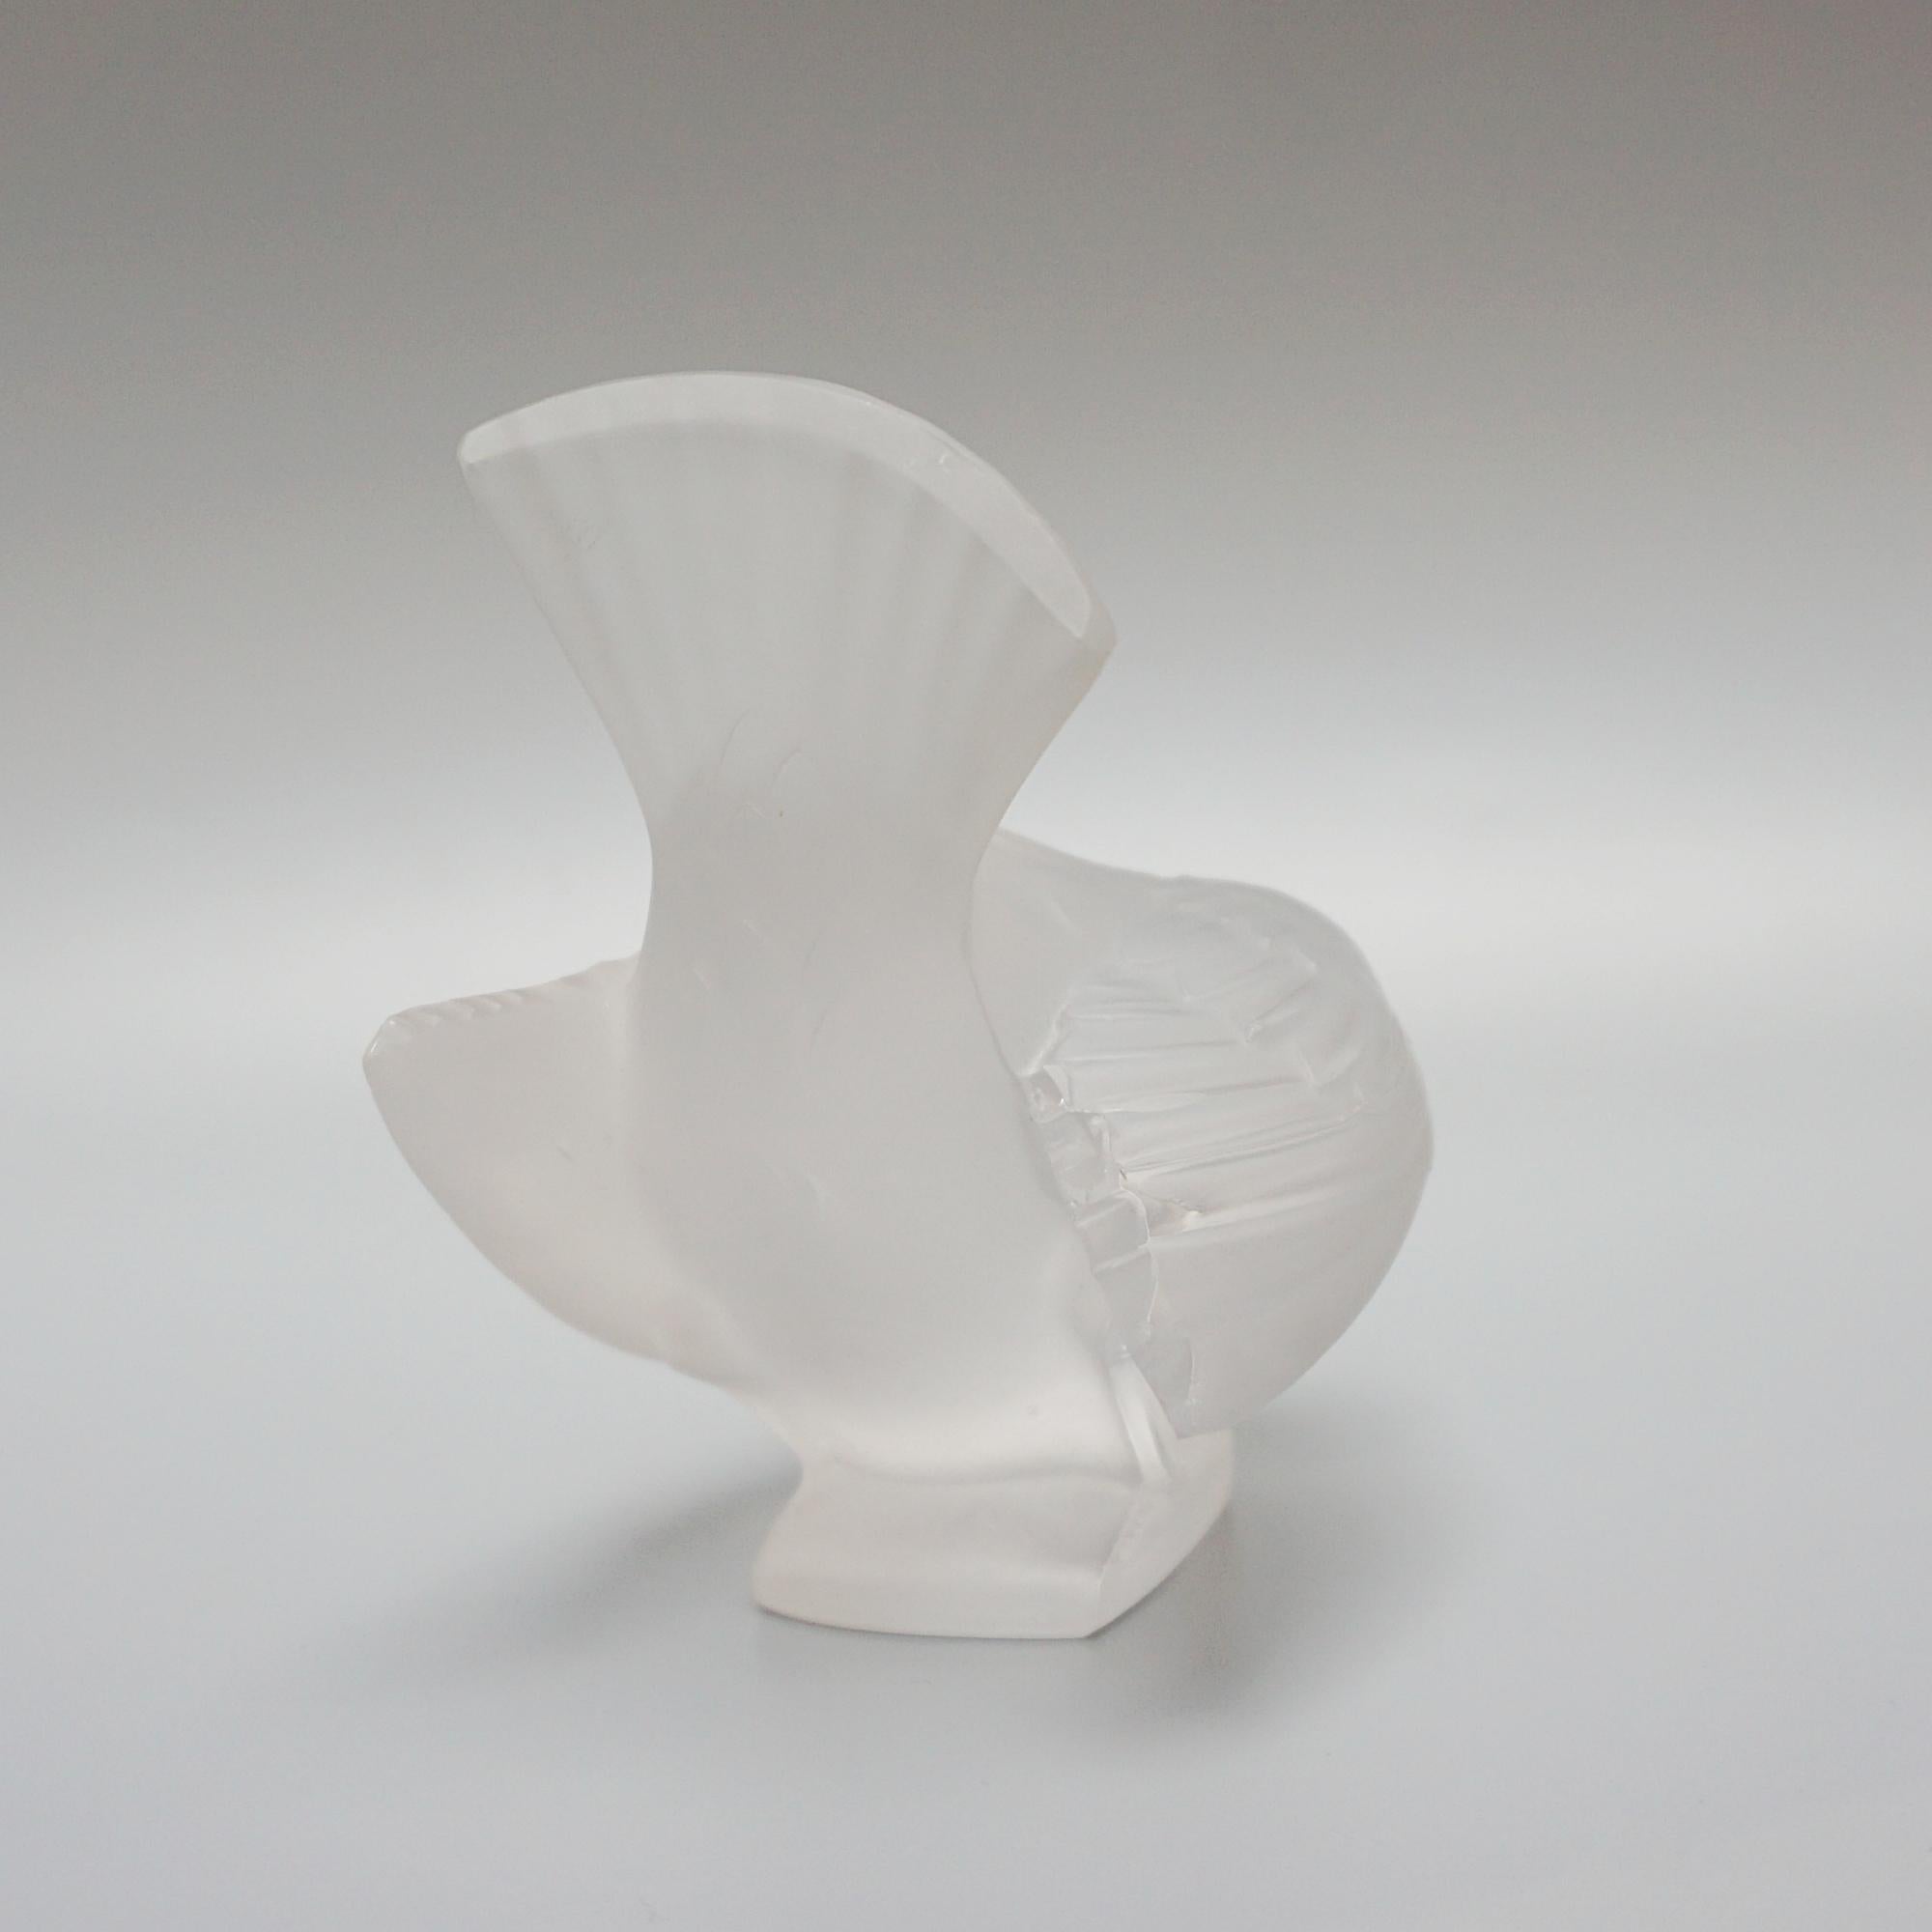 French 'Moineau Coquet' A Glass Bird Paperweight by Marc Lalique (1900 - 1977)